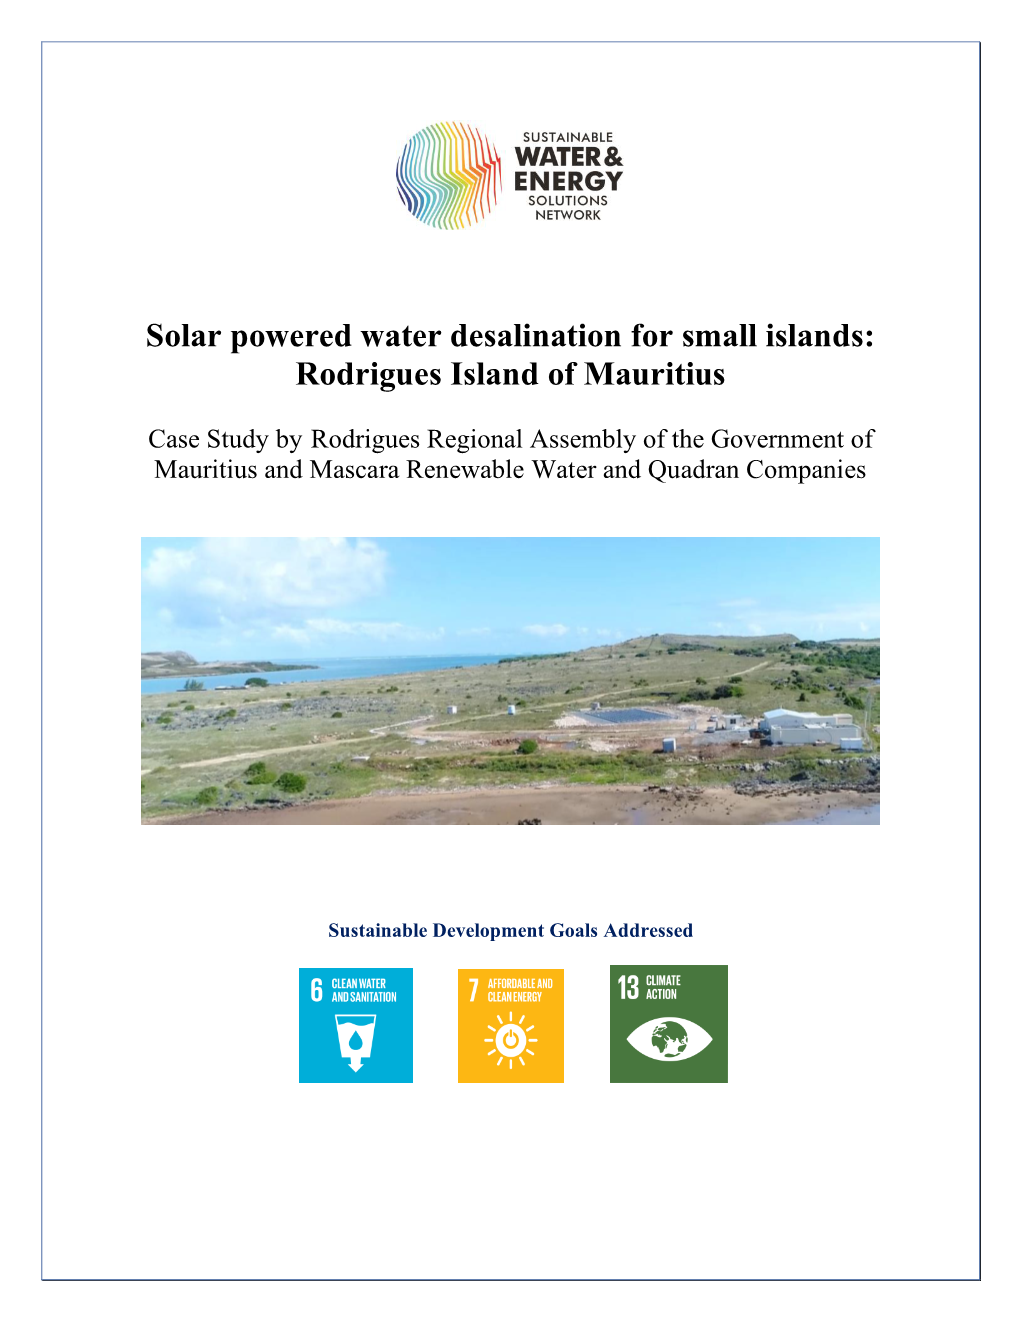 Solar Powered Water Desalination for Small Islands: Rodrigues Island of Mauritius